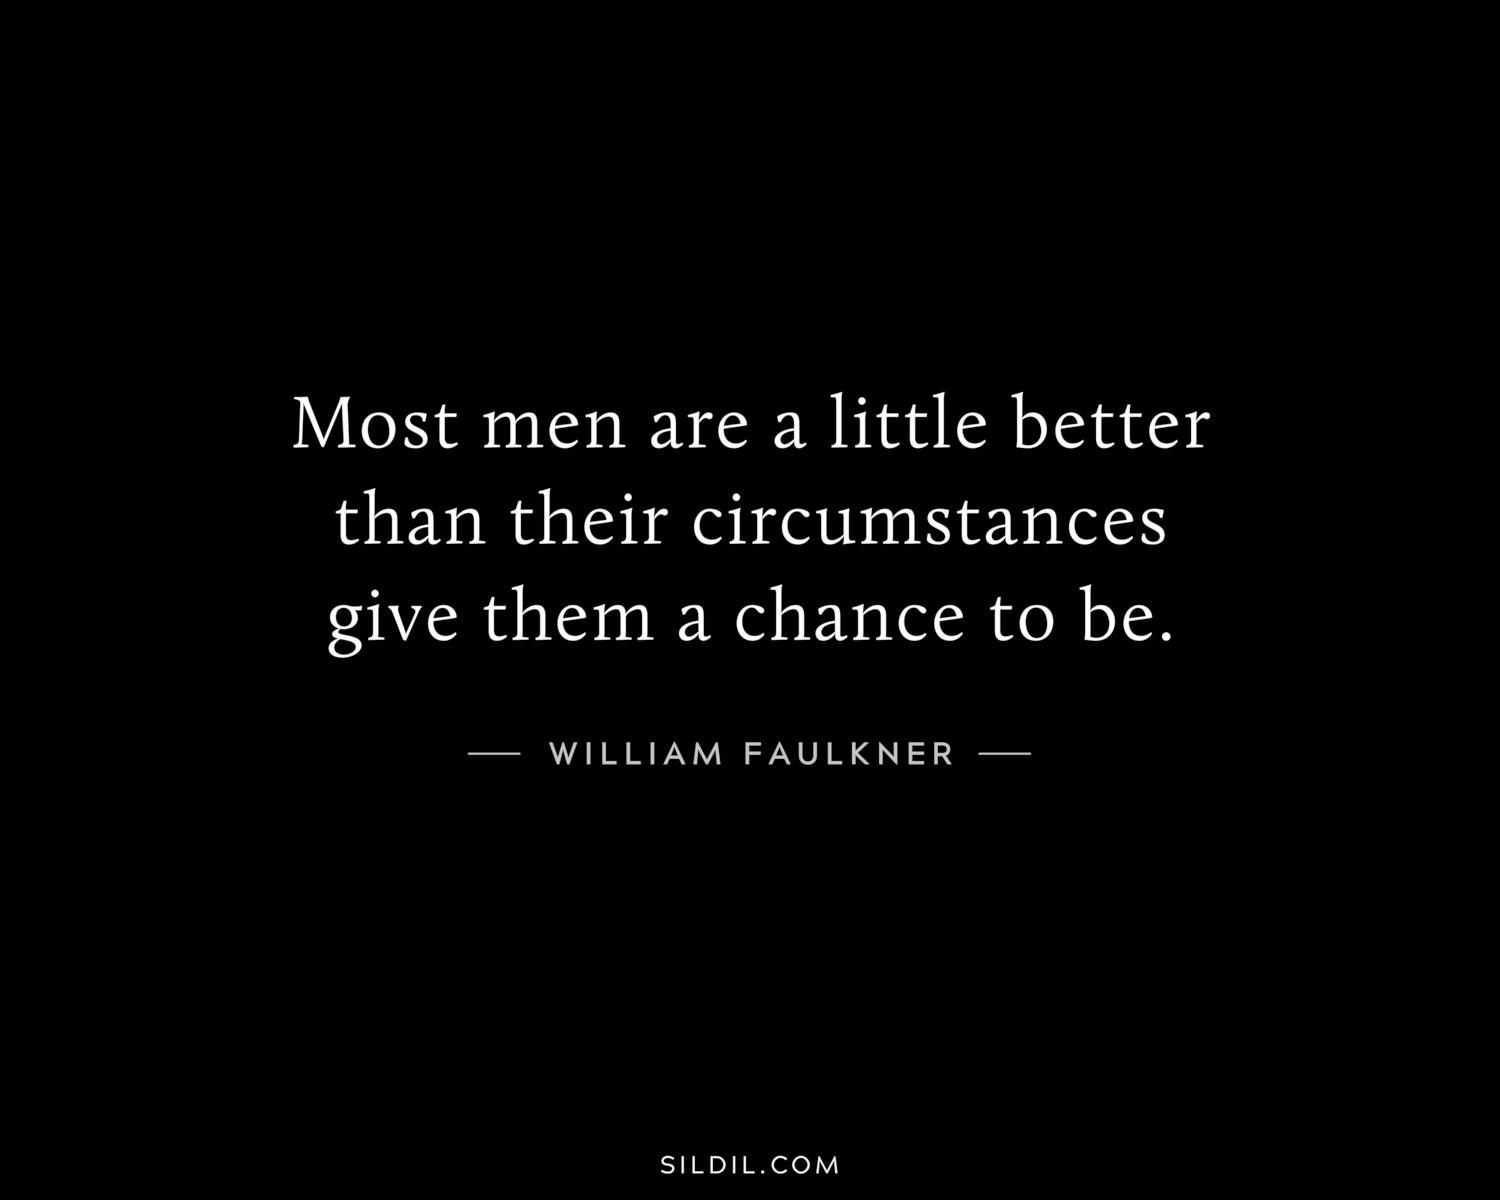 Most men are a little better than their circumstances give them a chance to be.